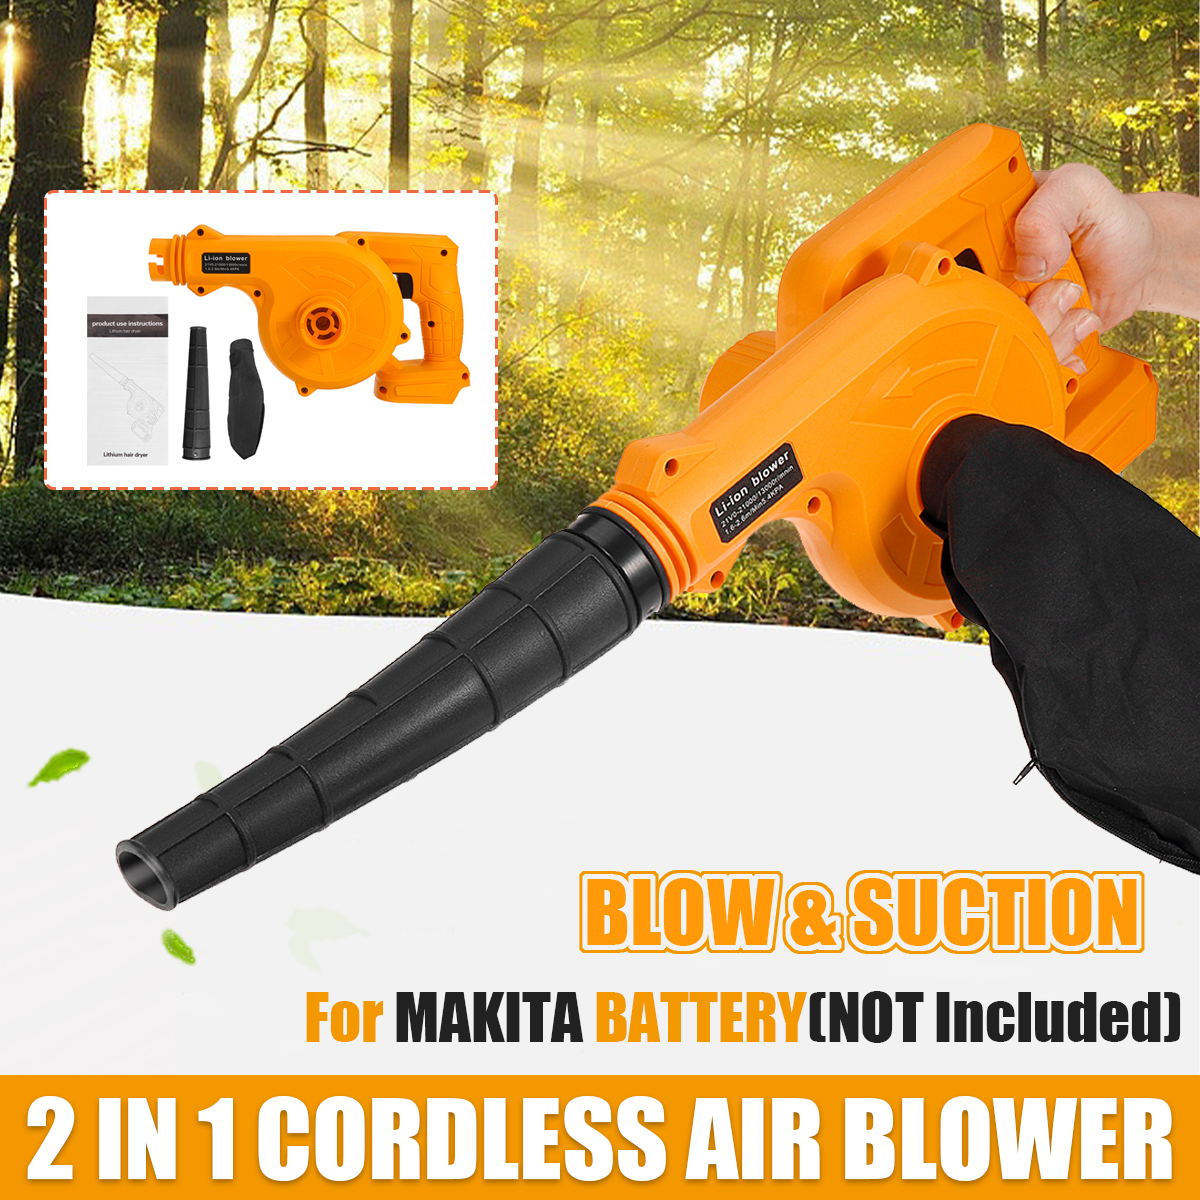 2-in-1-Cordless-Electric-Air-Blower--Suction-Dust-Remover-Leaf-Cleaner-for-Makita-18V-Battery-1856709-1